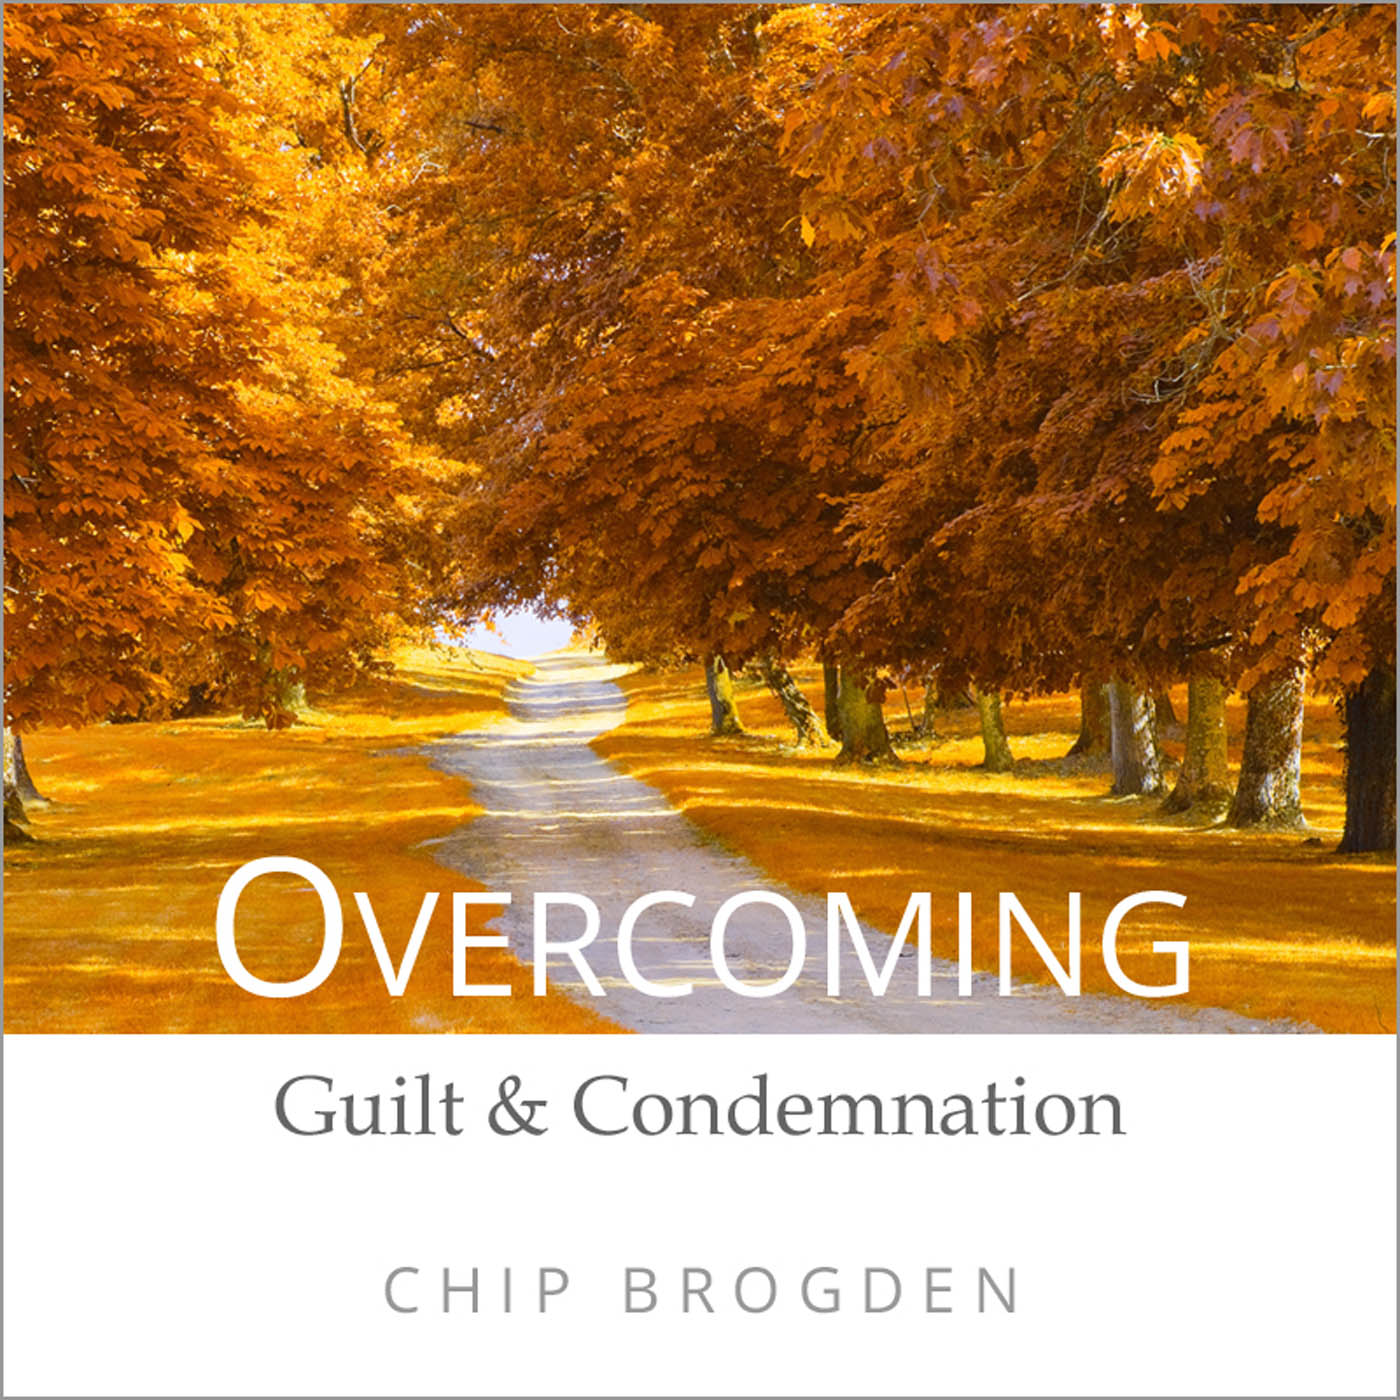 Overcoming Guilt & Condemnation